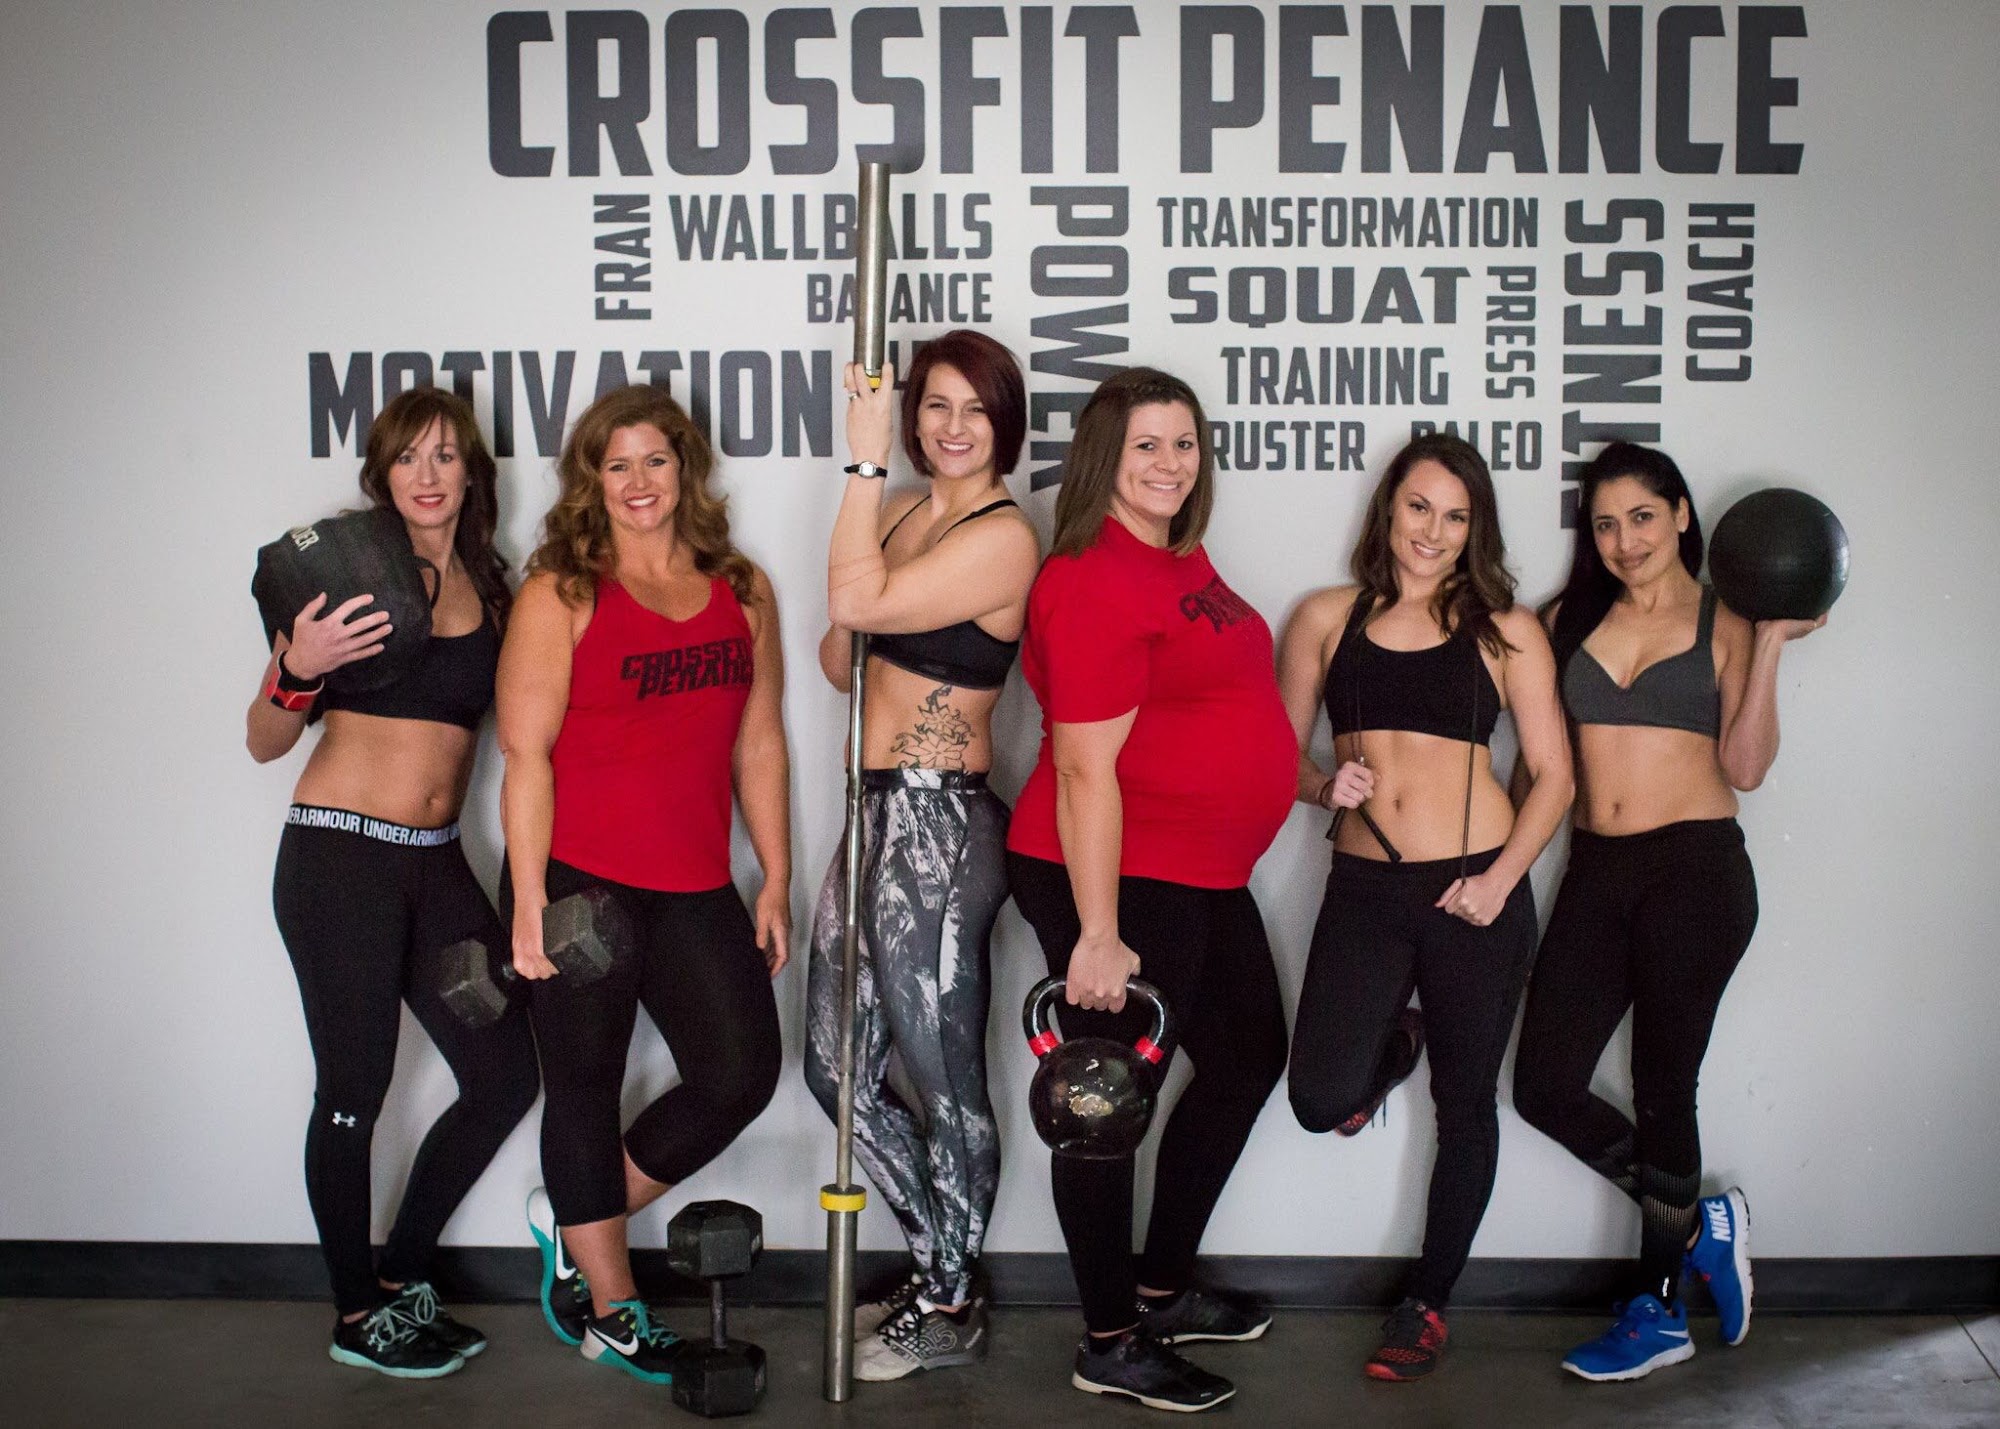 Penance Gym - Group Fitness and Personal Training 445 Bowers Rd #6, Oakland Tennessee 38060